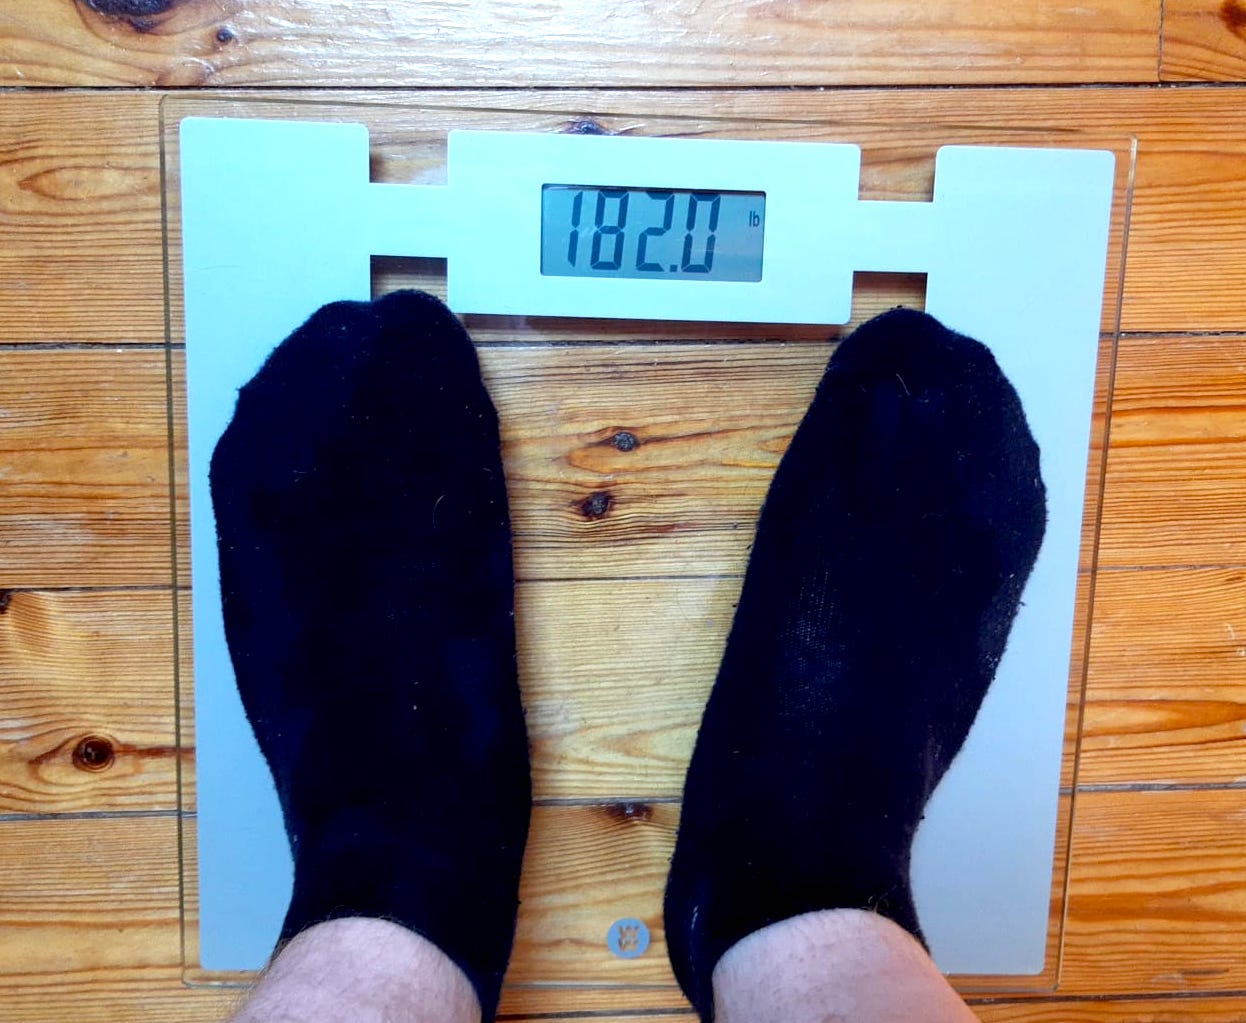 measuring weight on weighing scales after sauna blanket session - phase 2